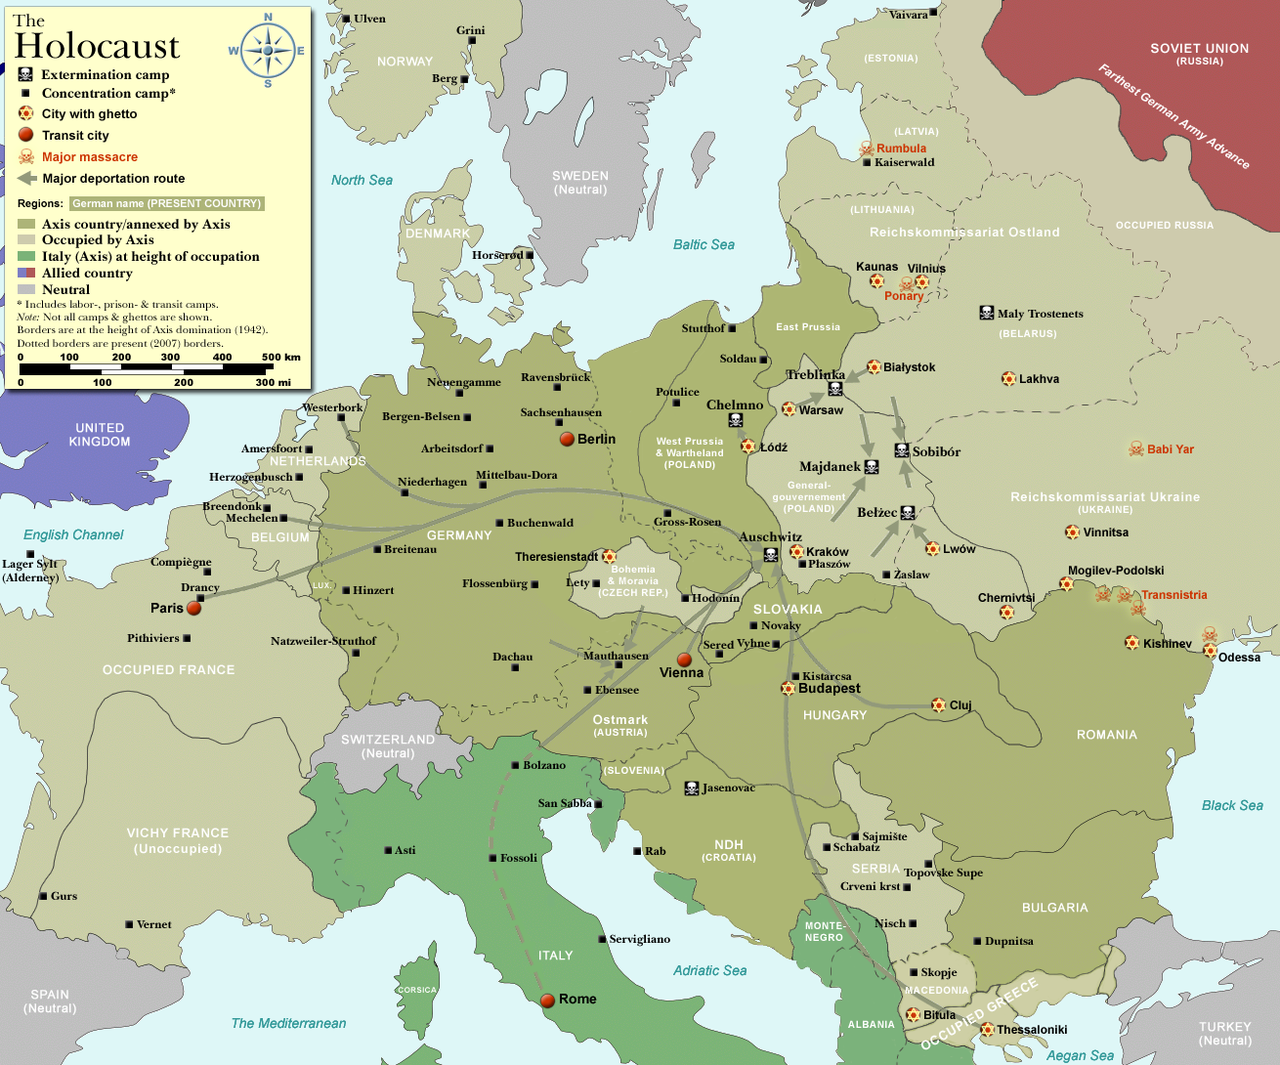 1280px-WW2-Holocaust-Europe.png